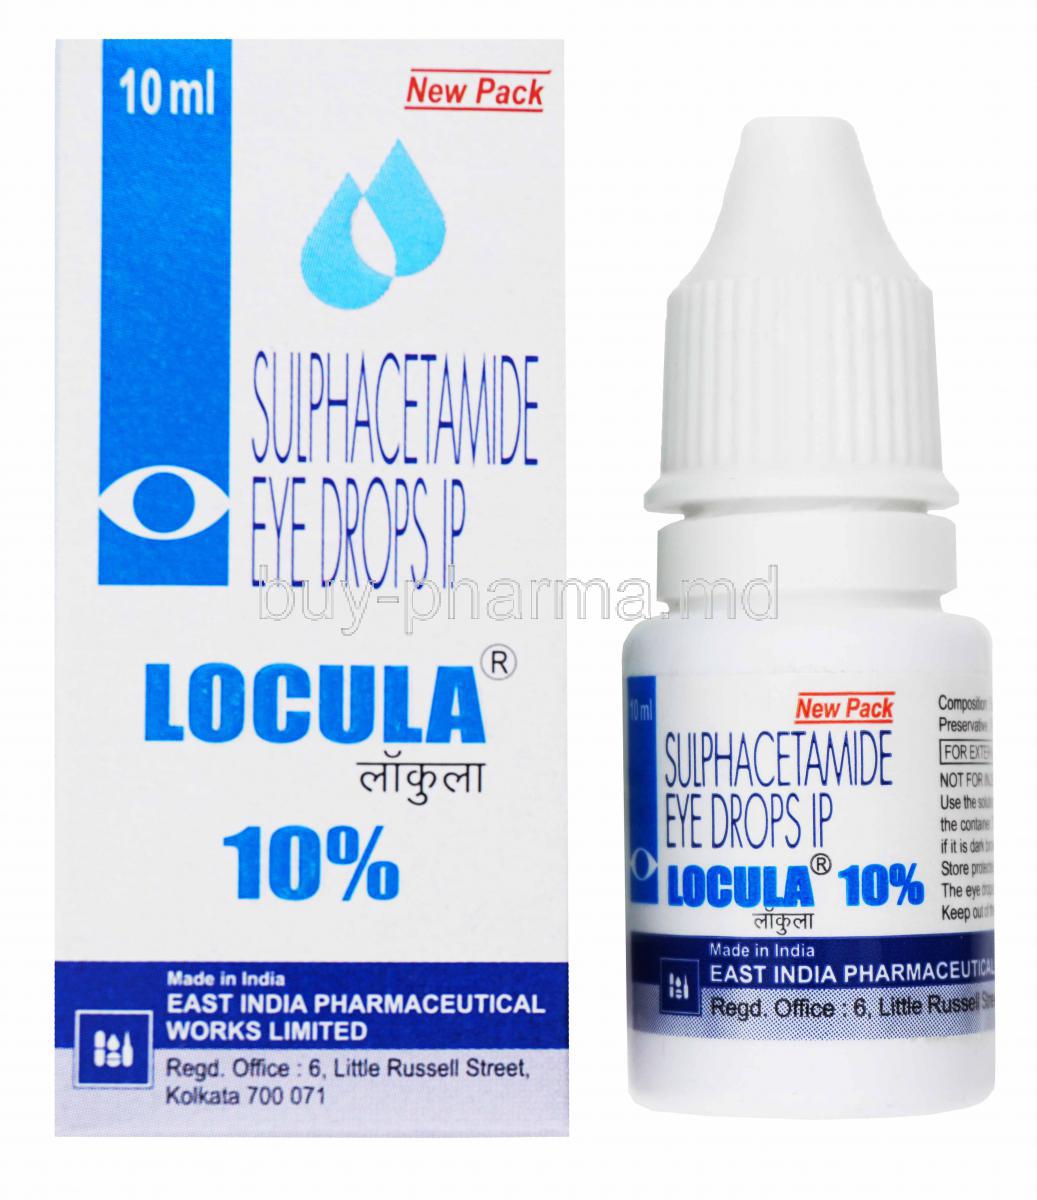 Sulfacetamide Sodium Eye Drop 10ml 10%, box and bottle front presentation with information